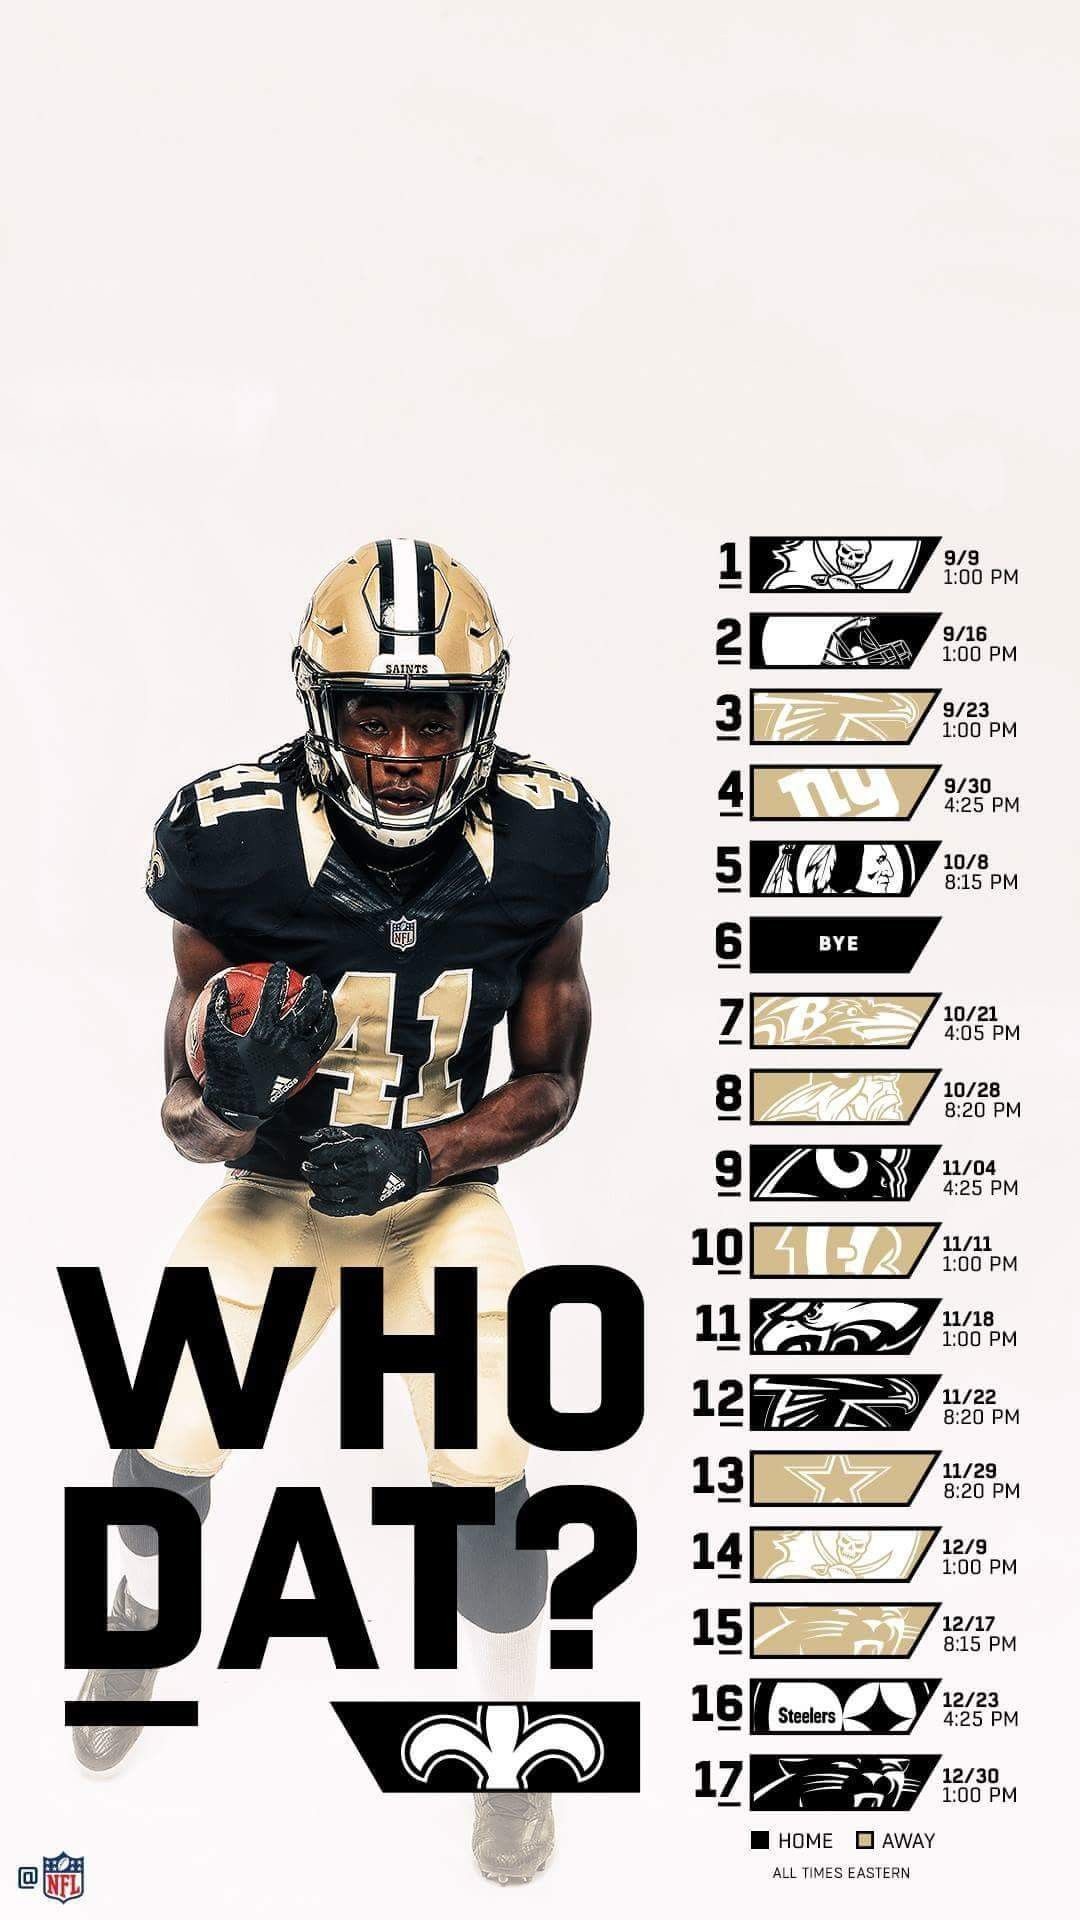 1080x1920 New Orleans Saints 2018 iPhone and Android Schedule wallpaper. #Whodat